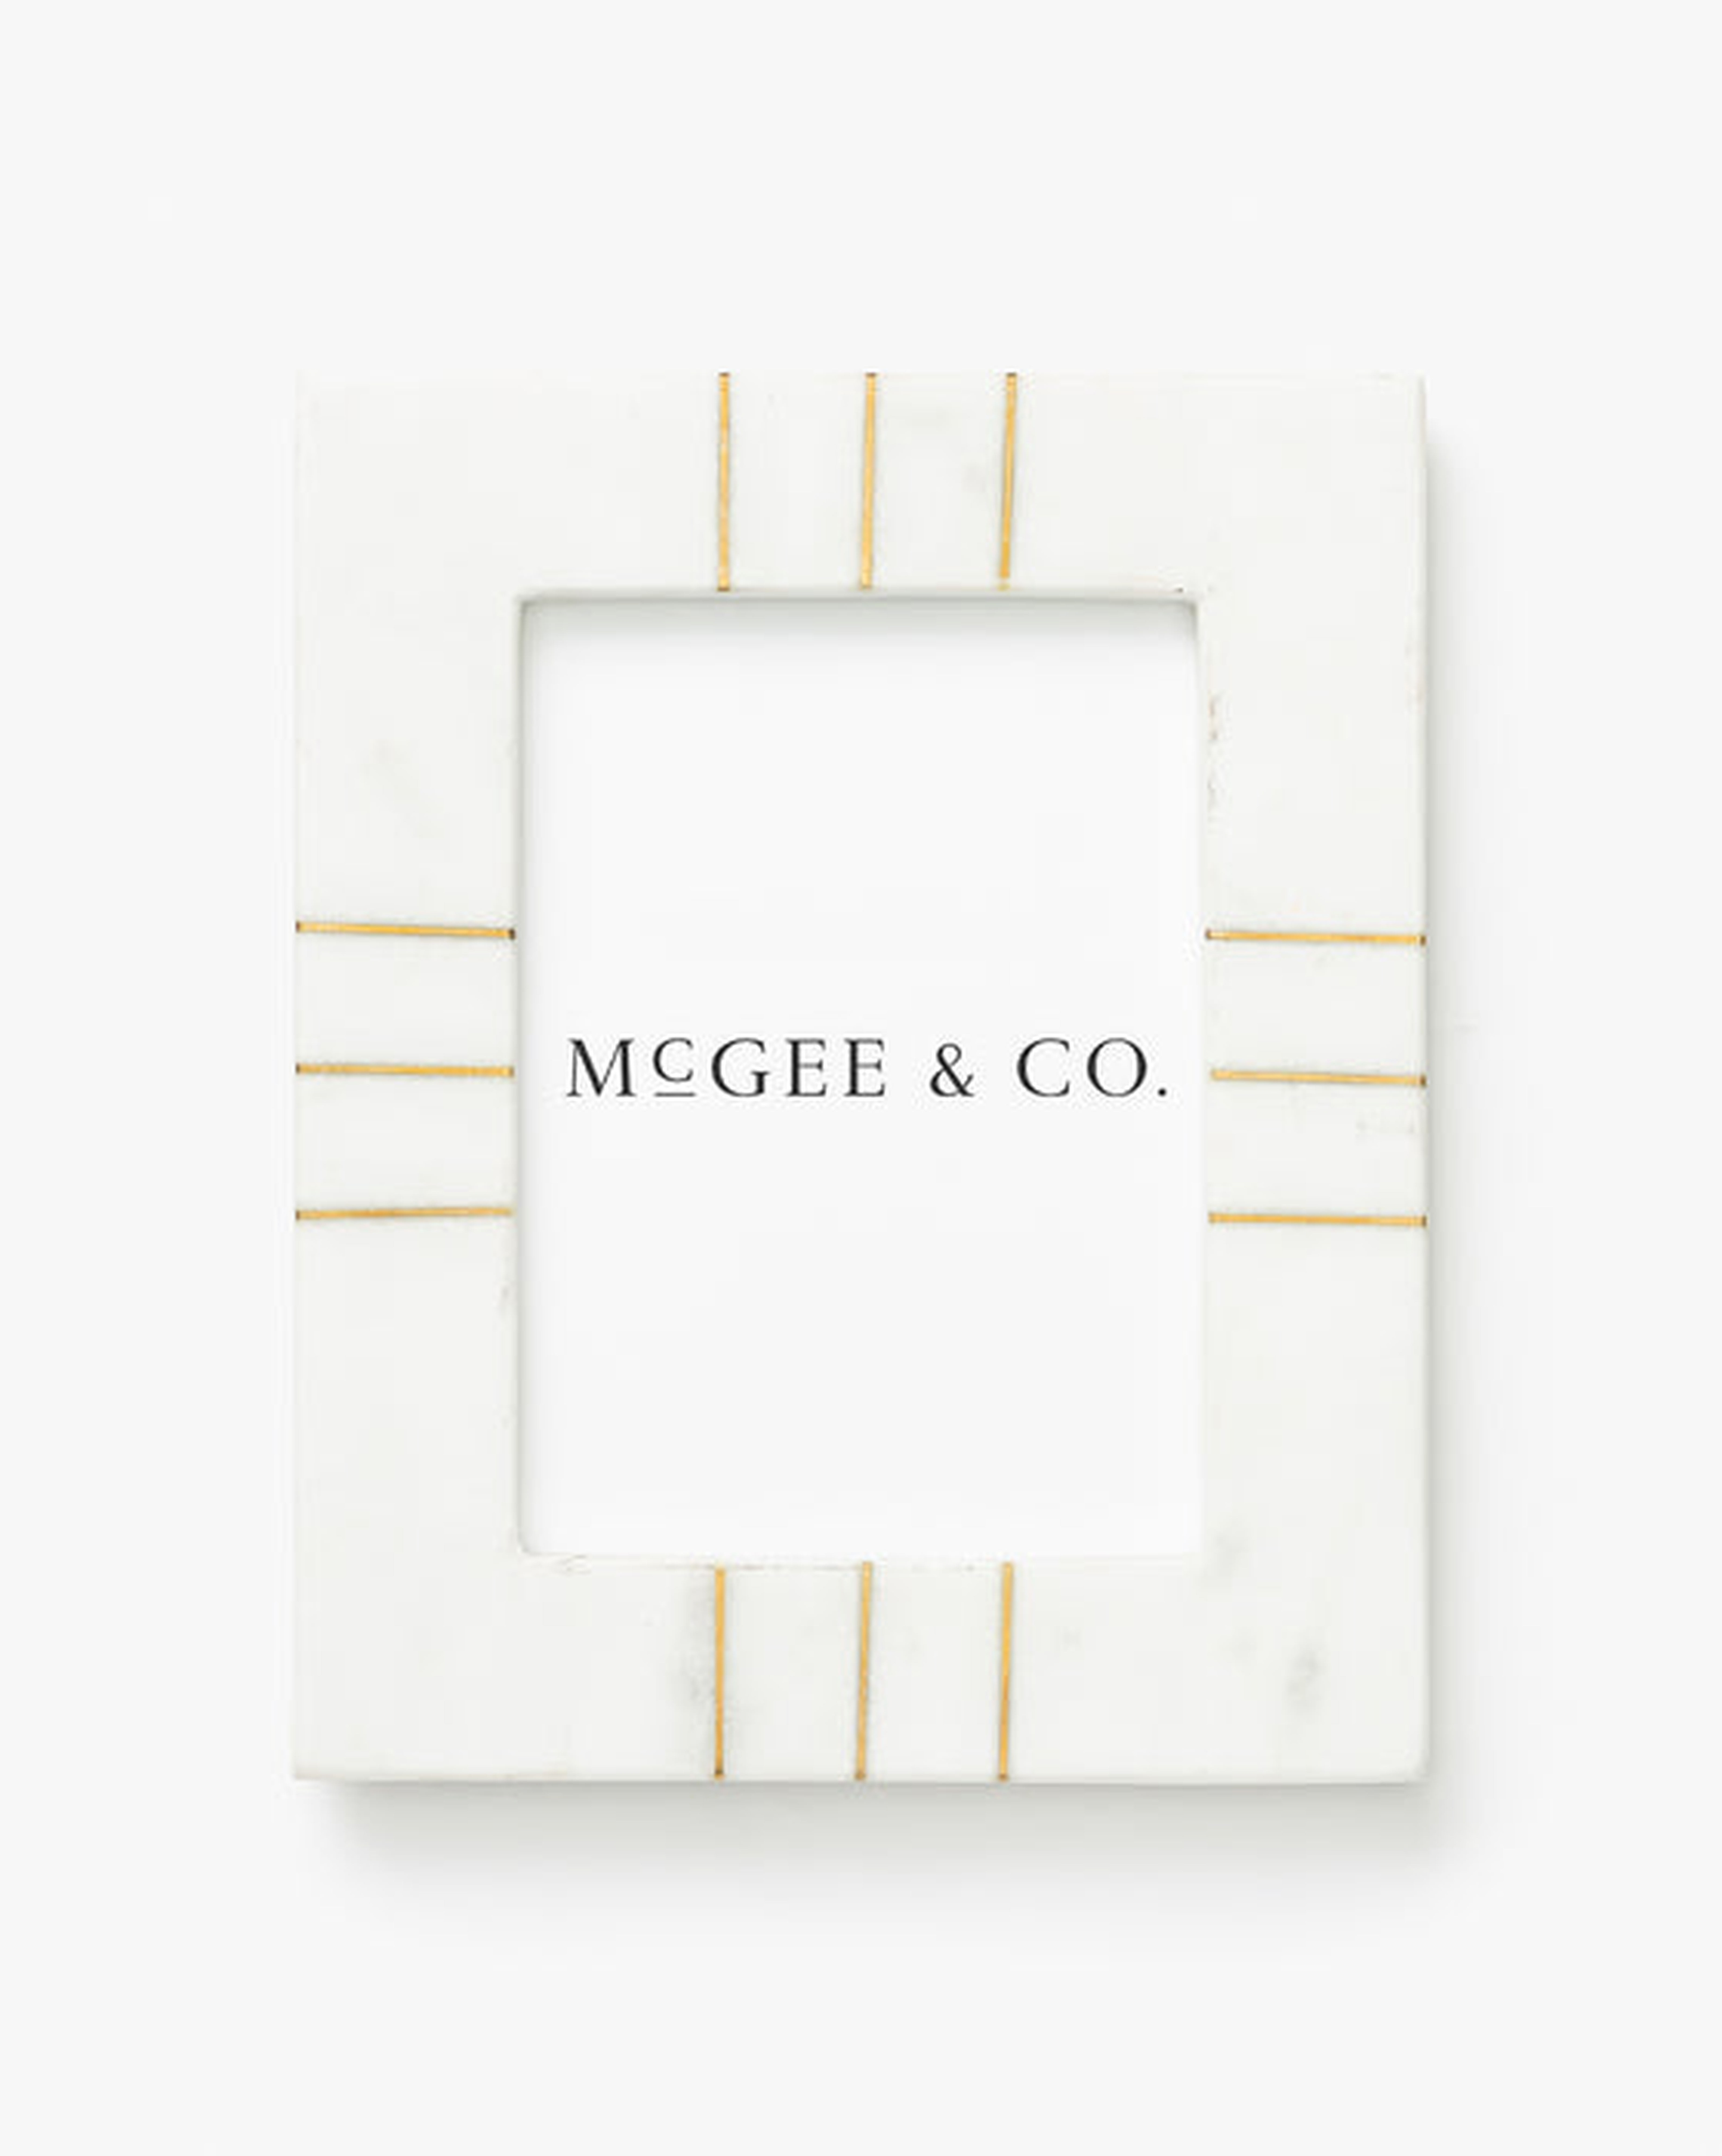 Marble & Brass Frame, 4" x 6" - McGee & Co.